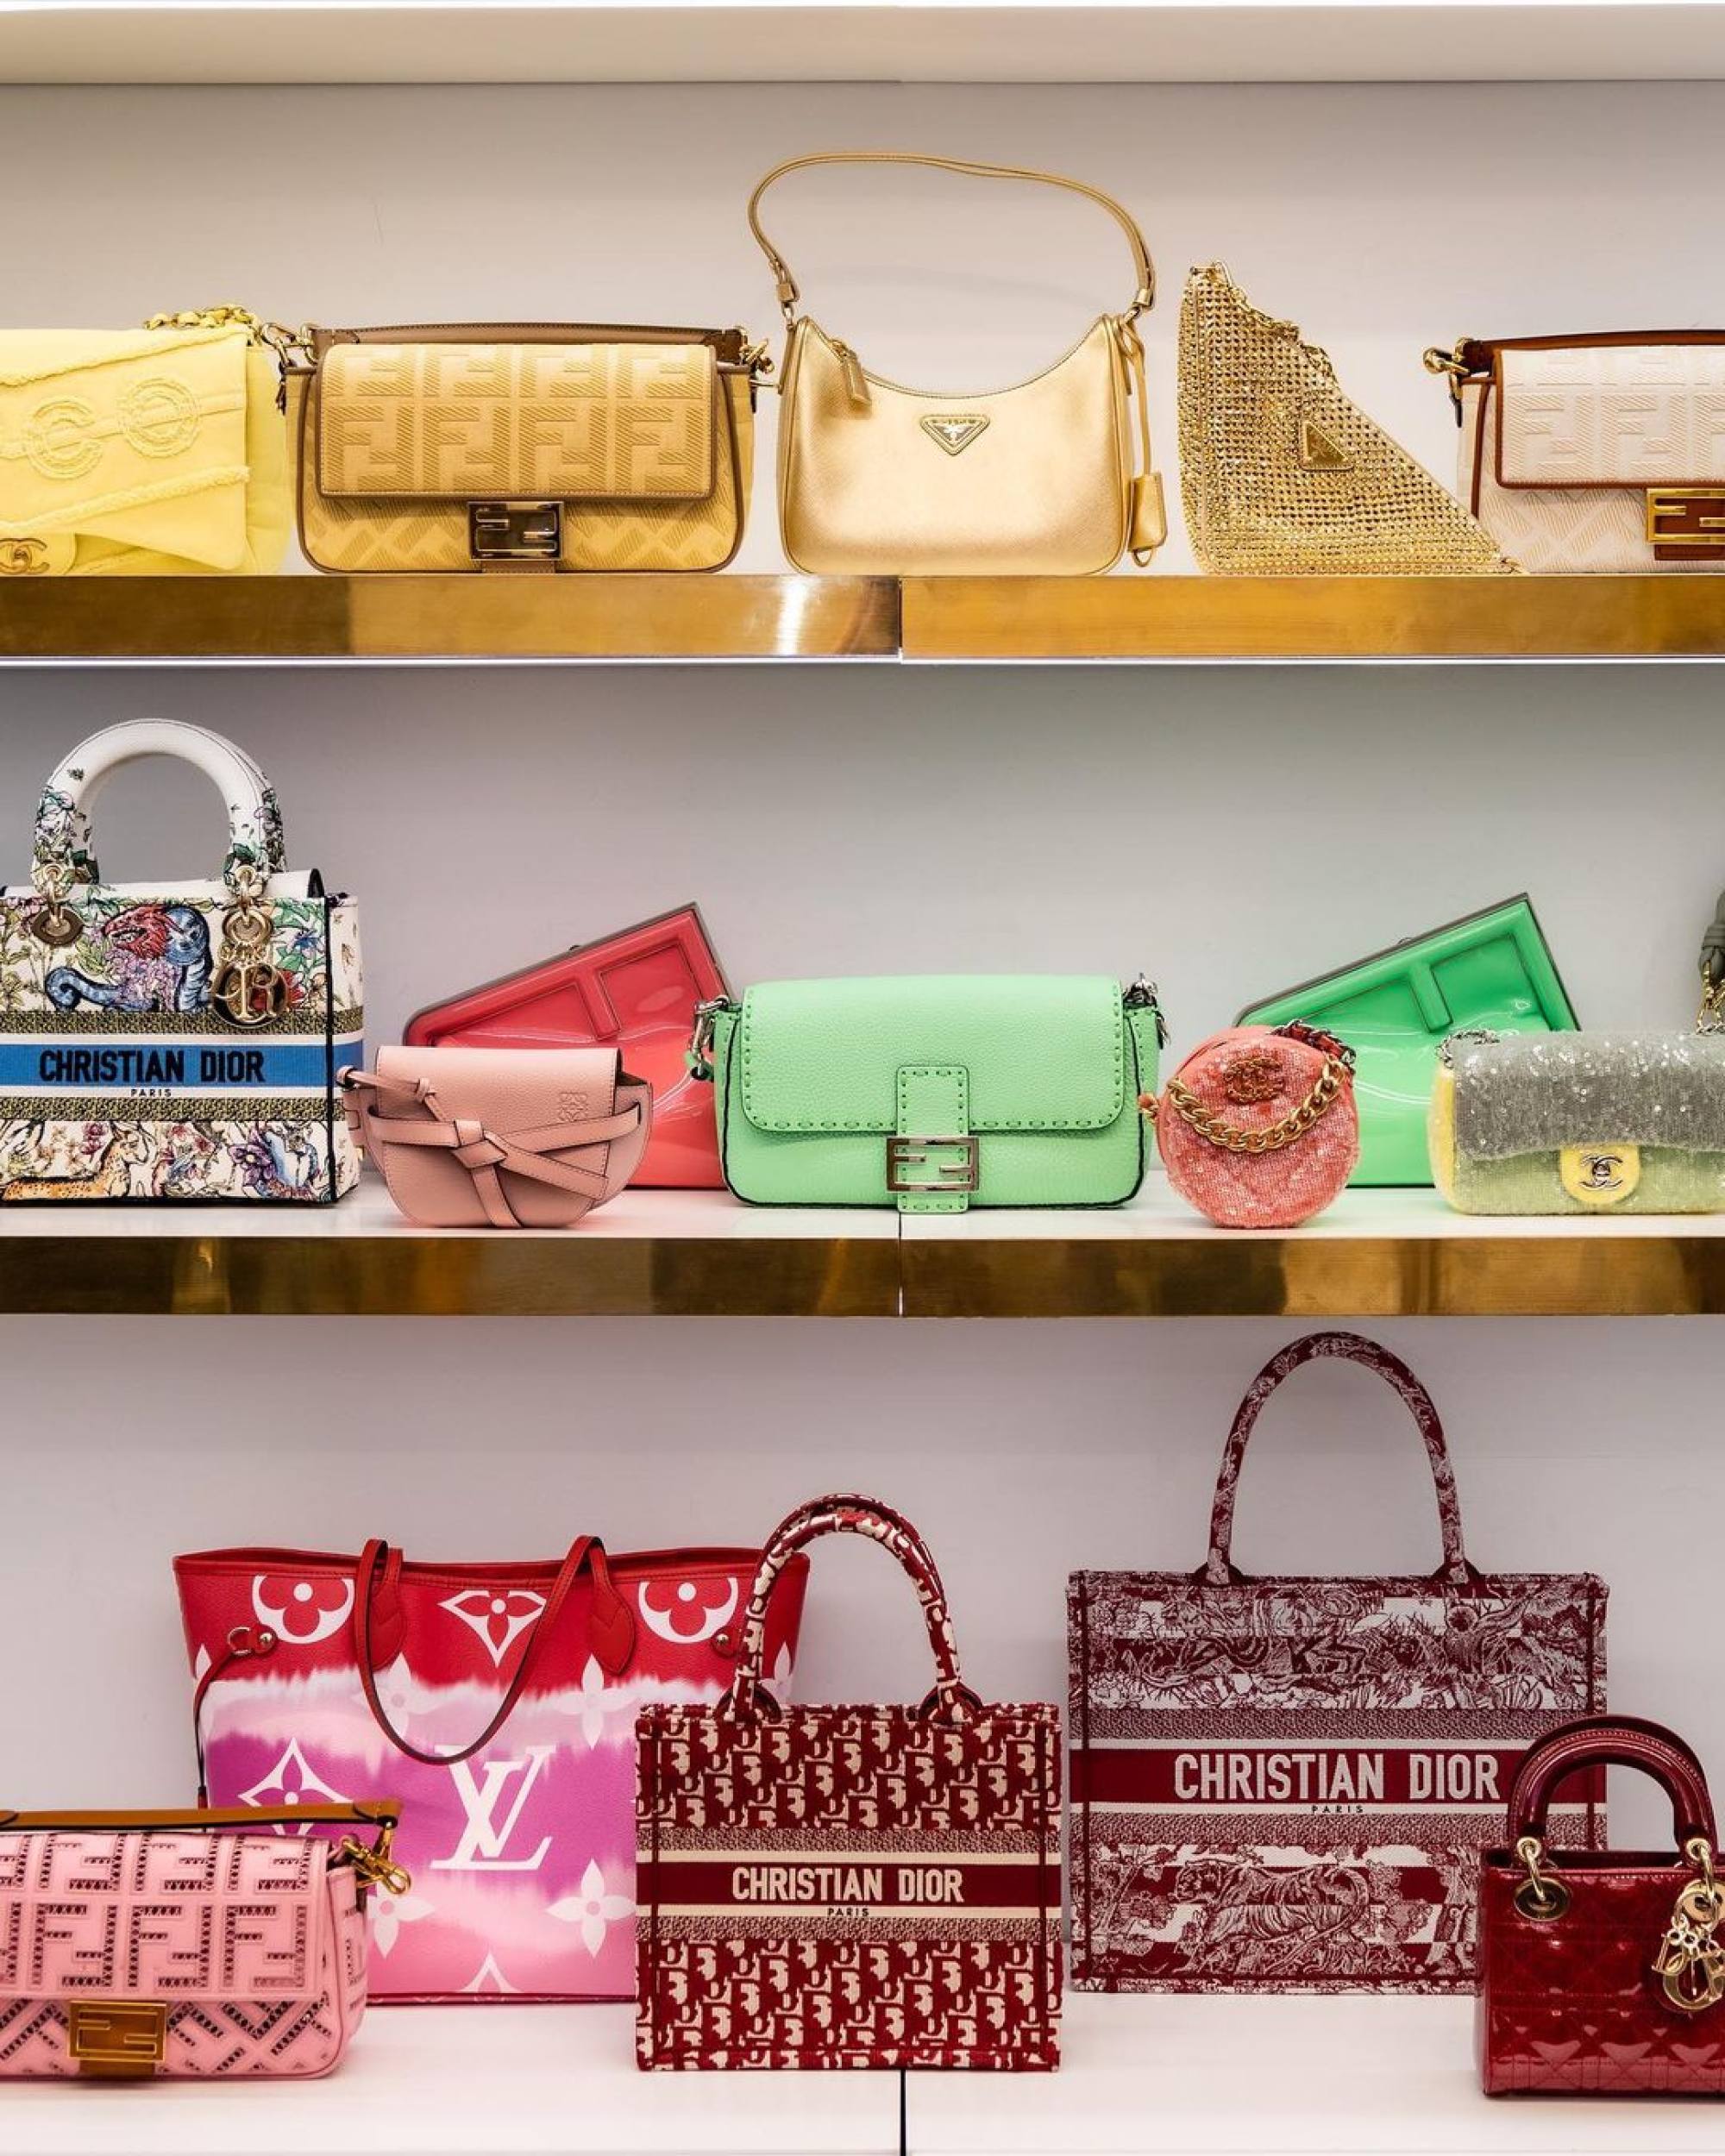 12 luxury handbag brands coveted by The RealReal online shoppers.